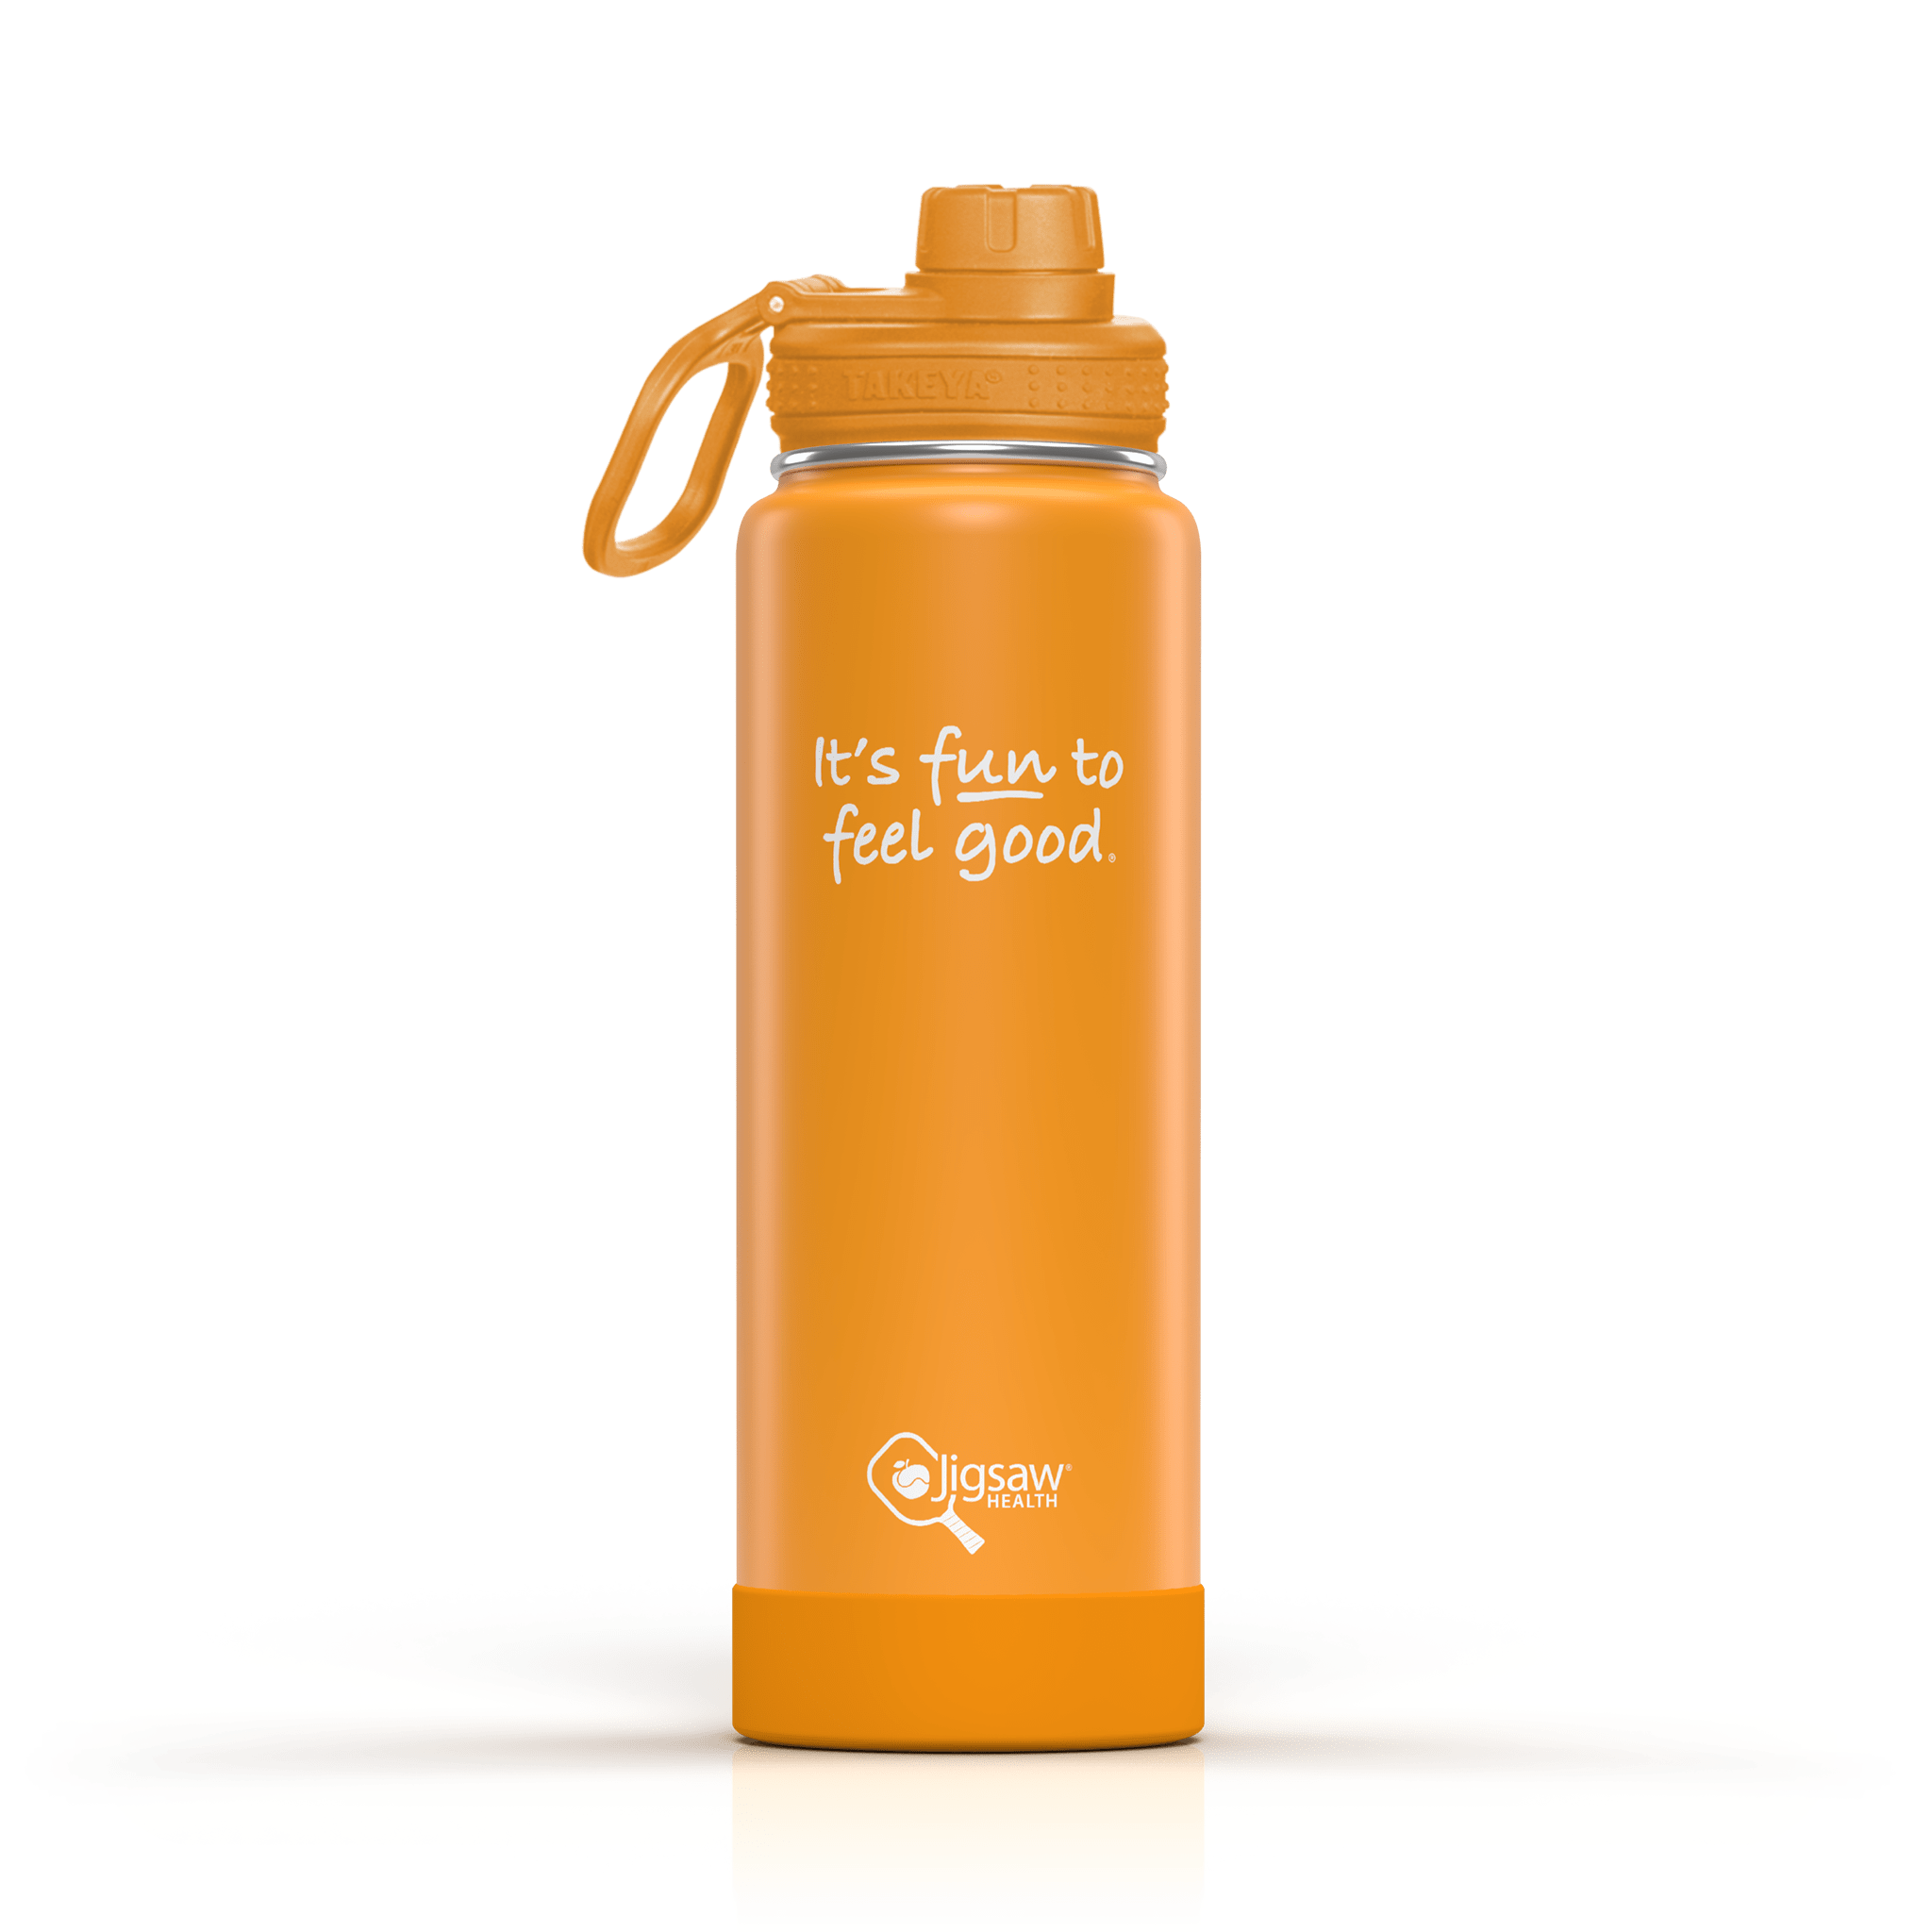 Shop Insulated Water Bottles in Stainless Steel